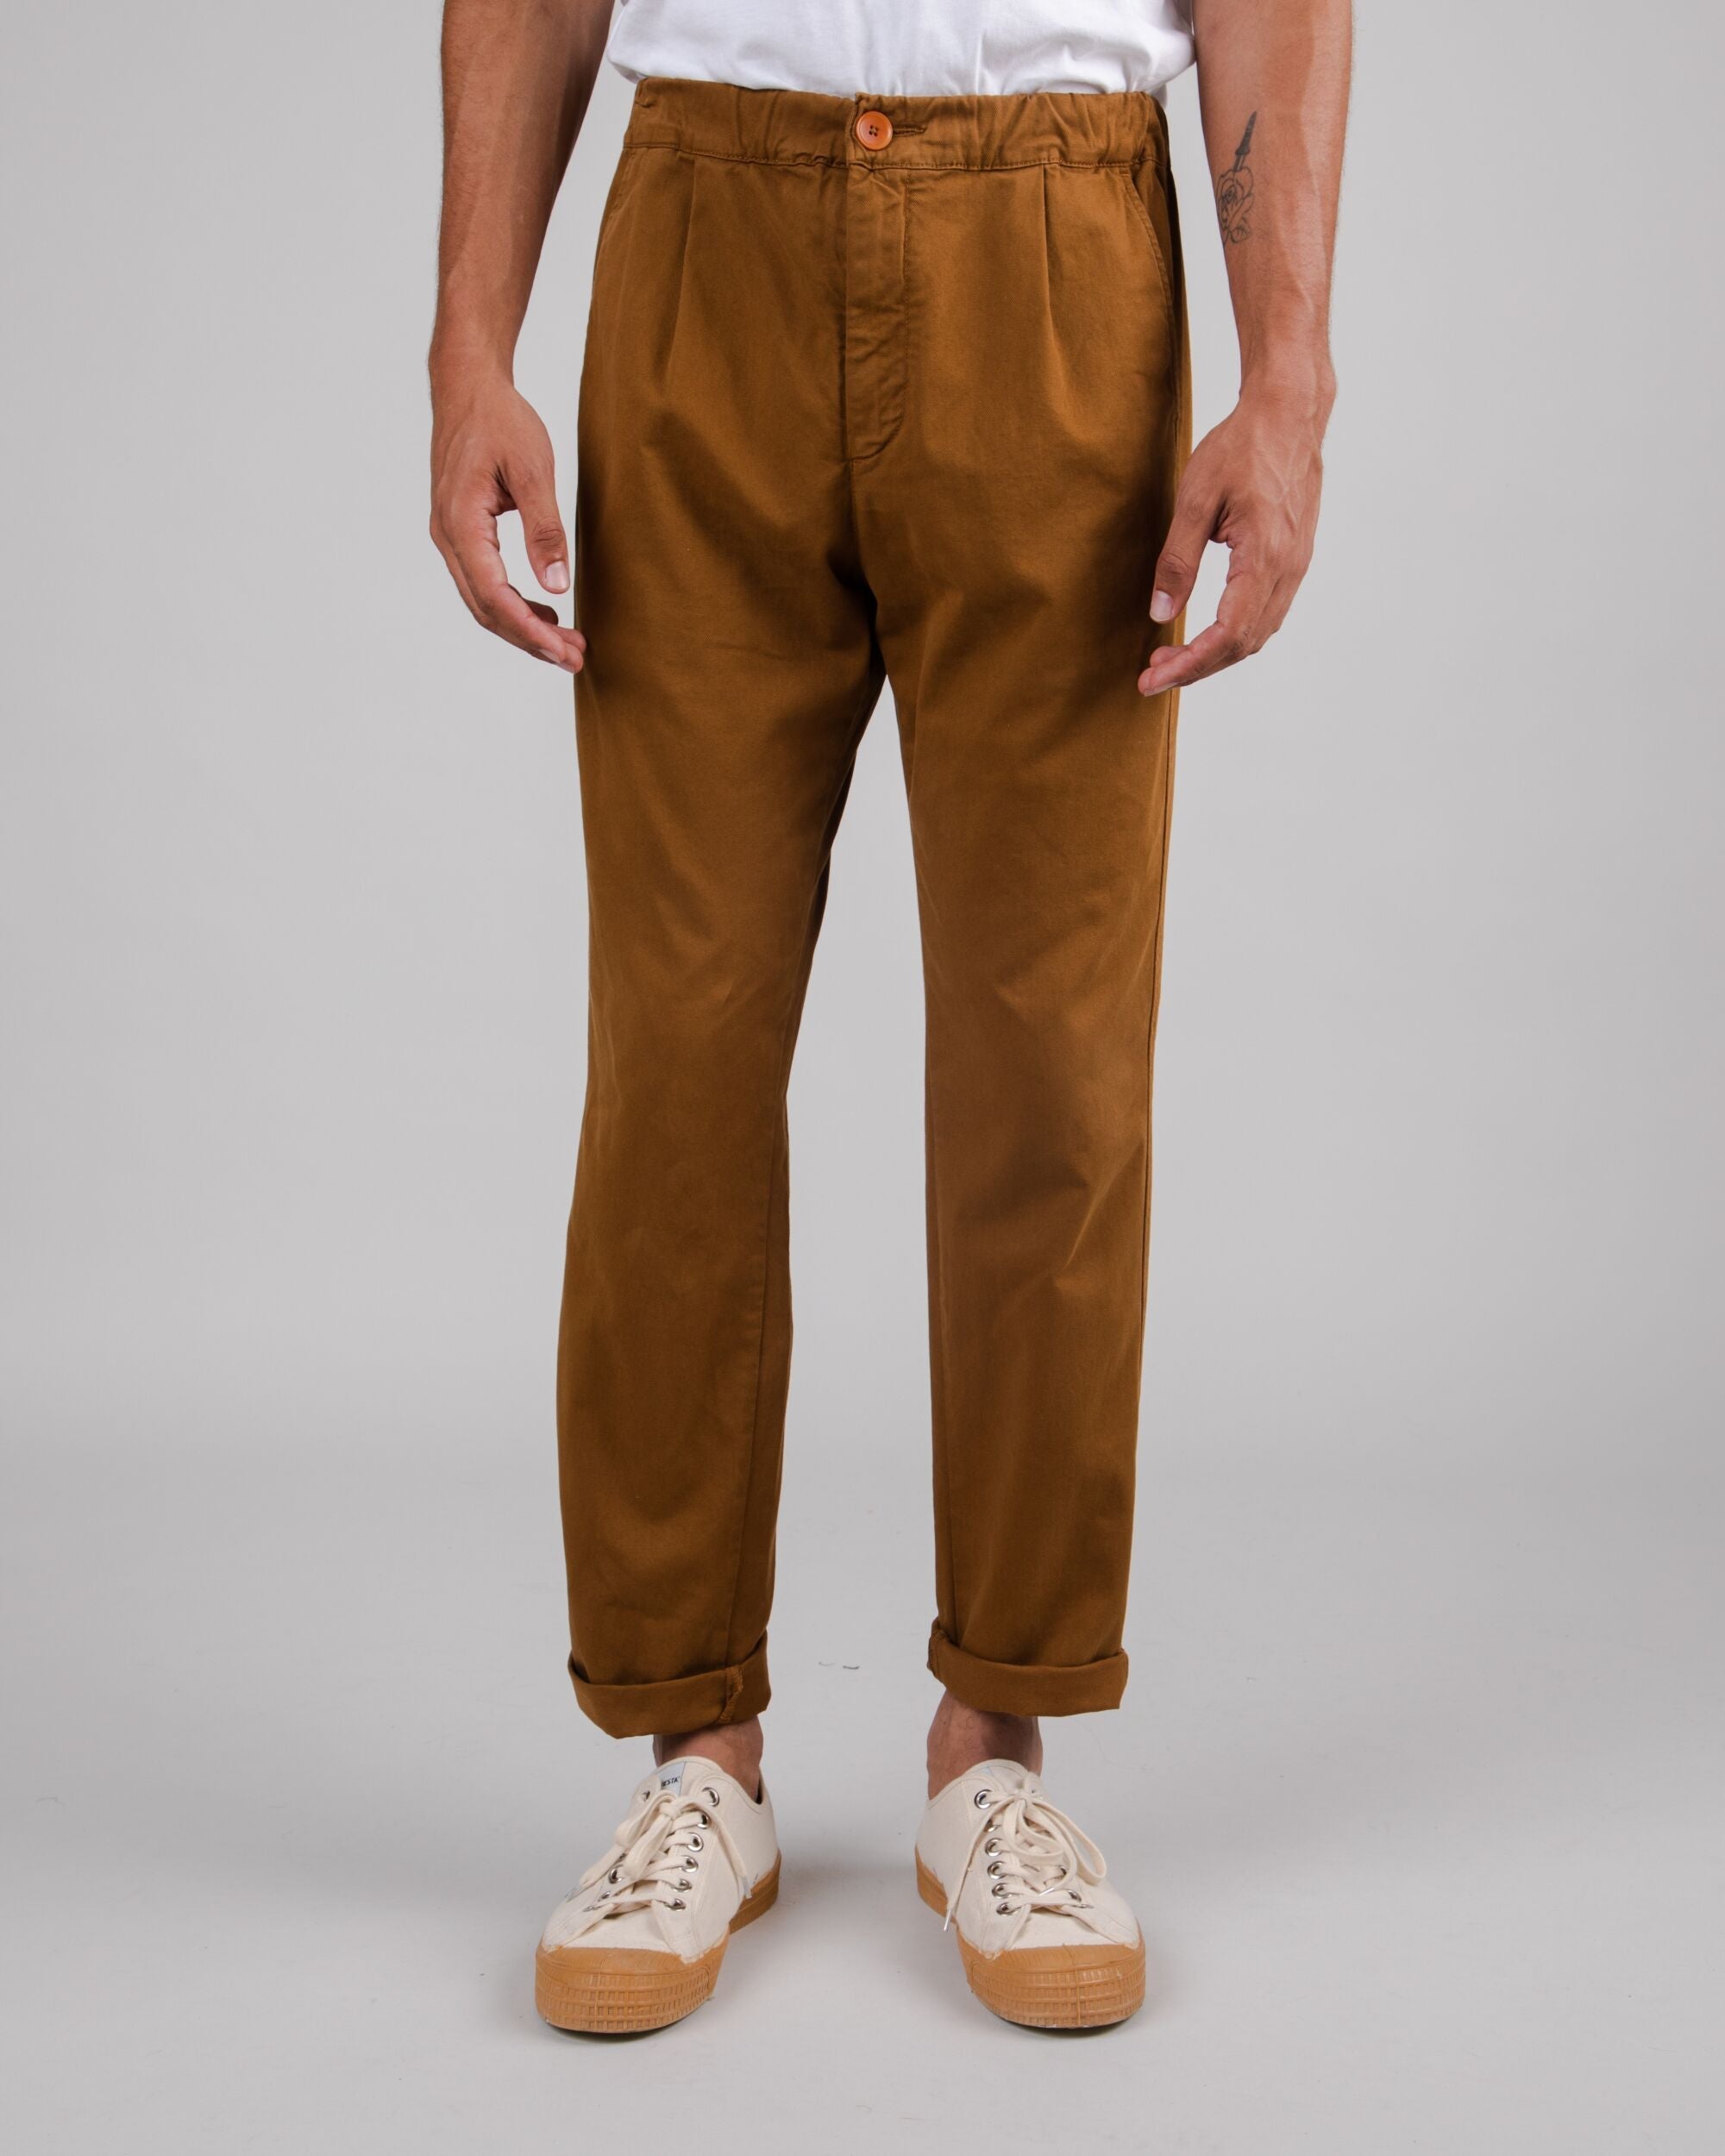 Comfort chino pants in brown made from organic cotton from Brava Fabrics